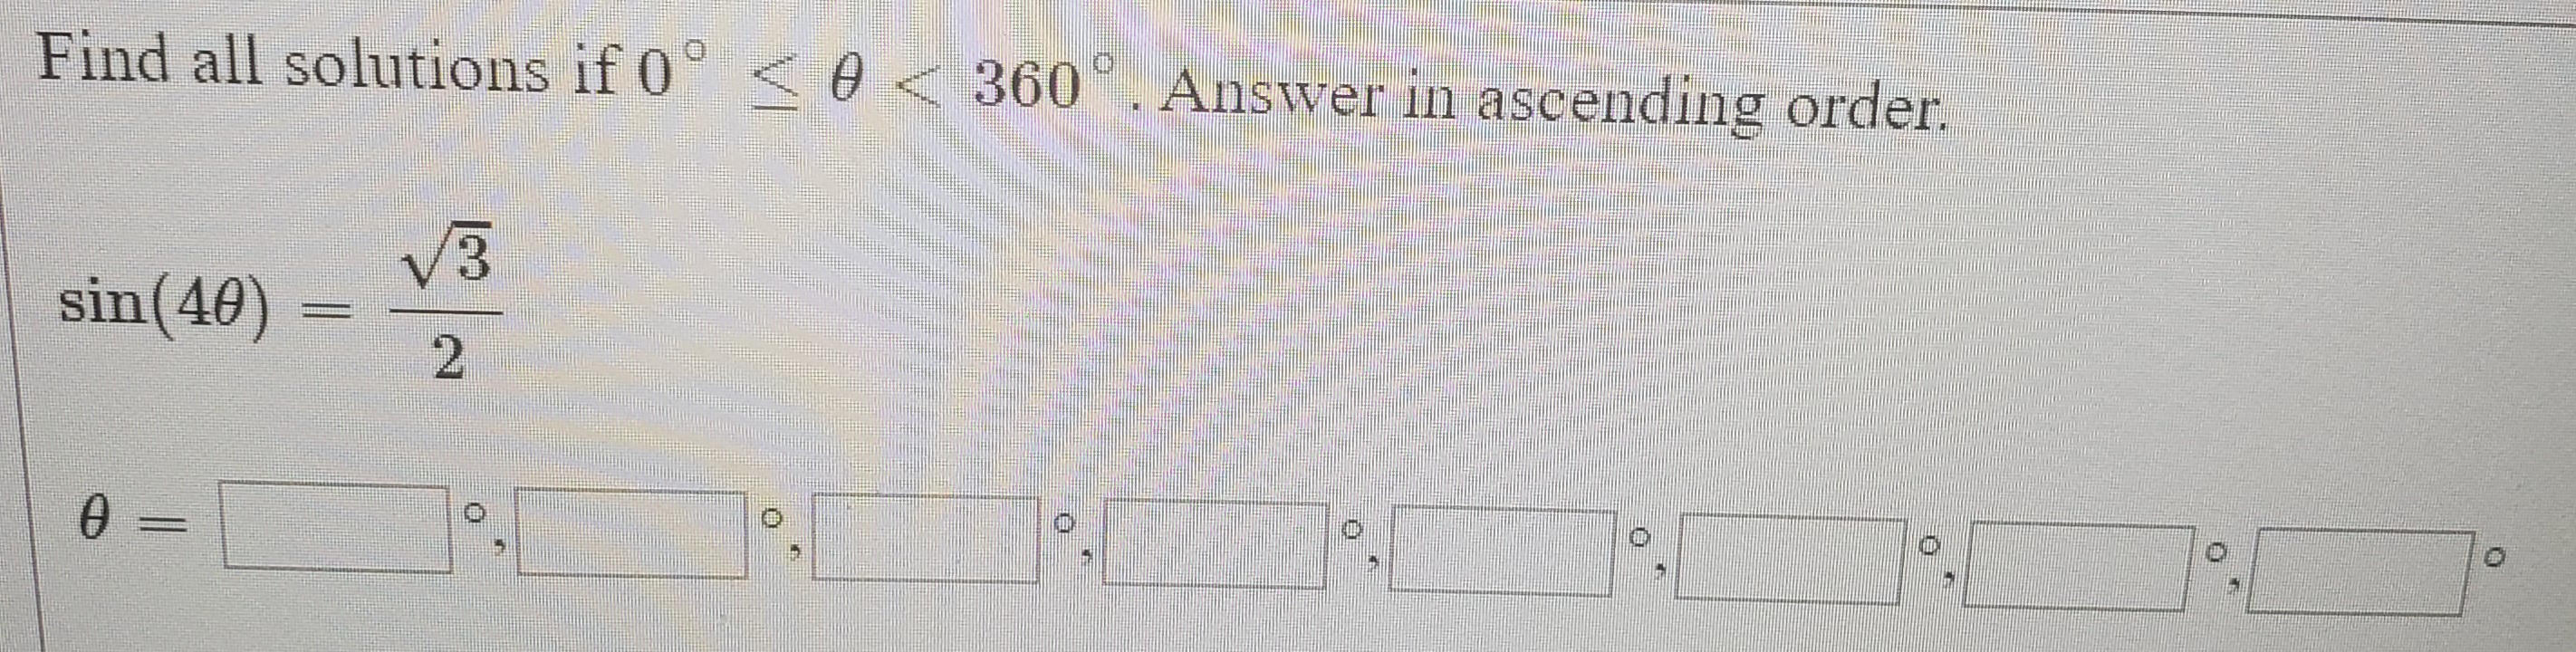 Find all solutions if 0° < 0 < .
360. Answer in ascending order.
V3
sin(40)
